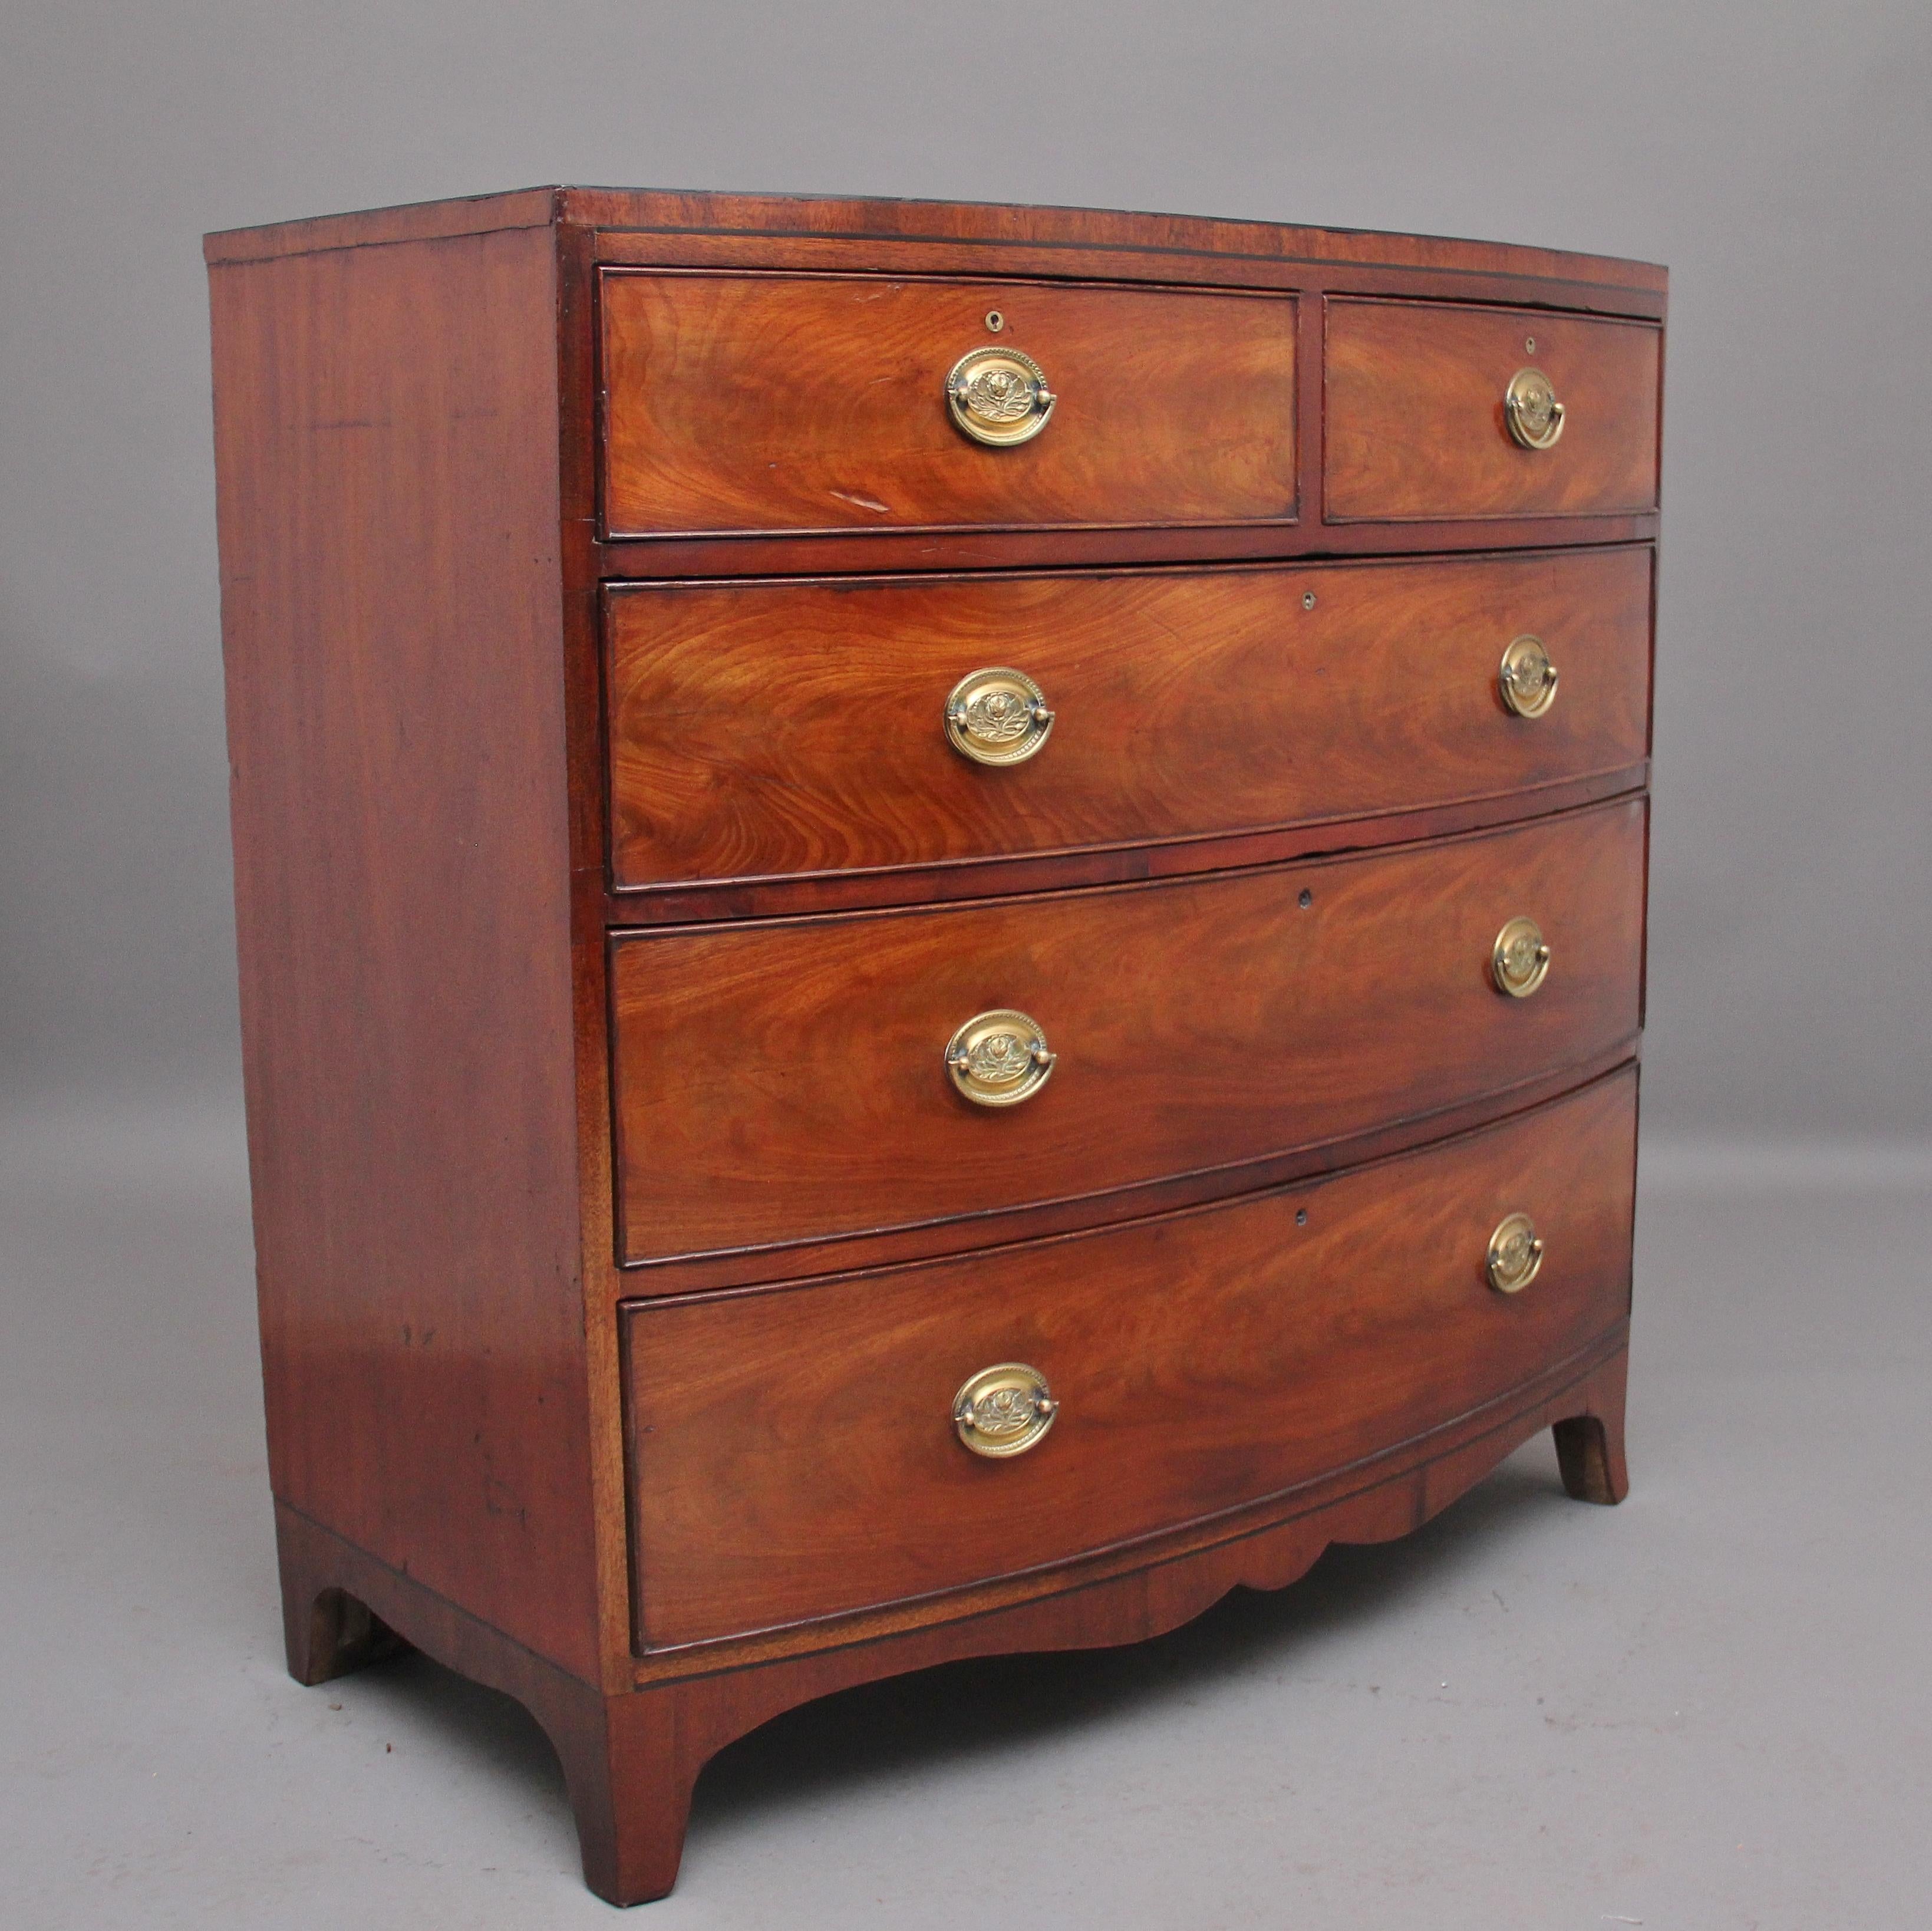 A lovely quality early 19th century mahogany bowfront chest of drawers of nice proportions, having a nice figured inlaid top above a selection of two short over three long oak lined graduated drawers, with oval brass plate handles, shaped apron on